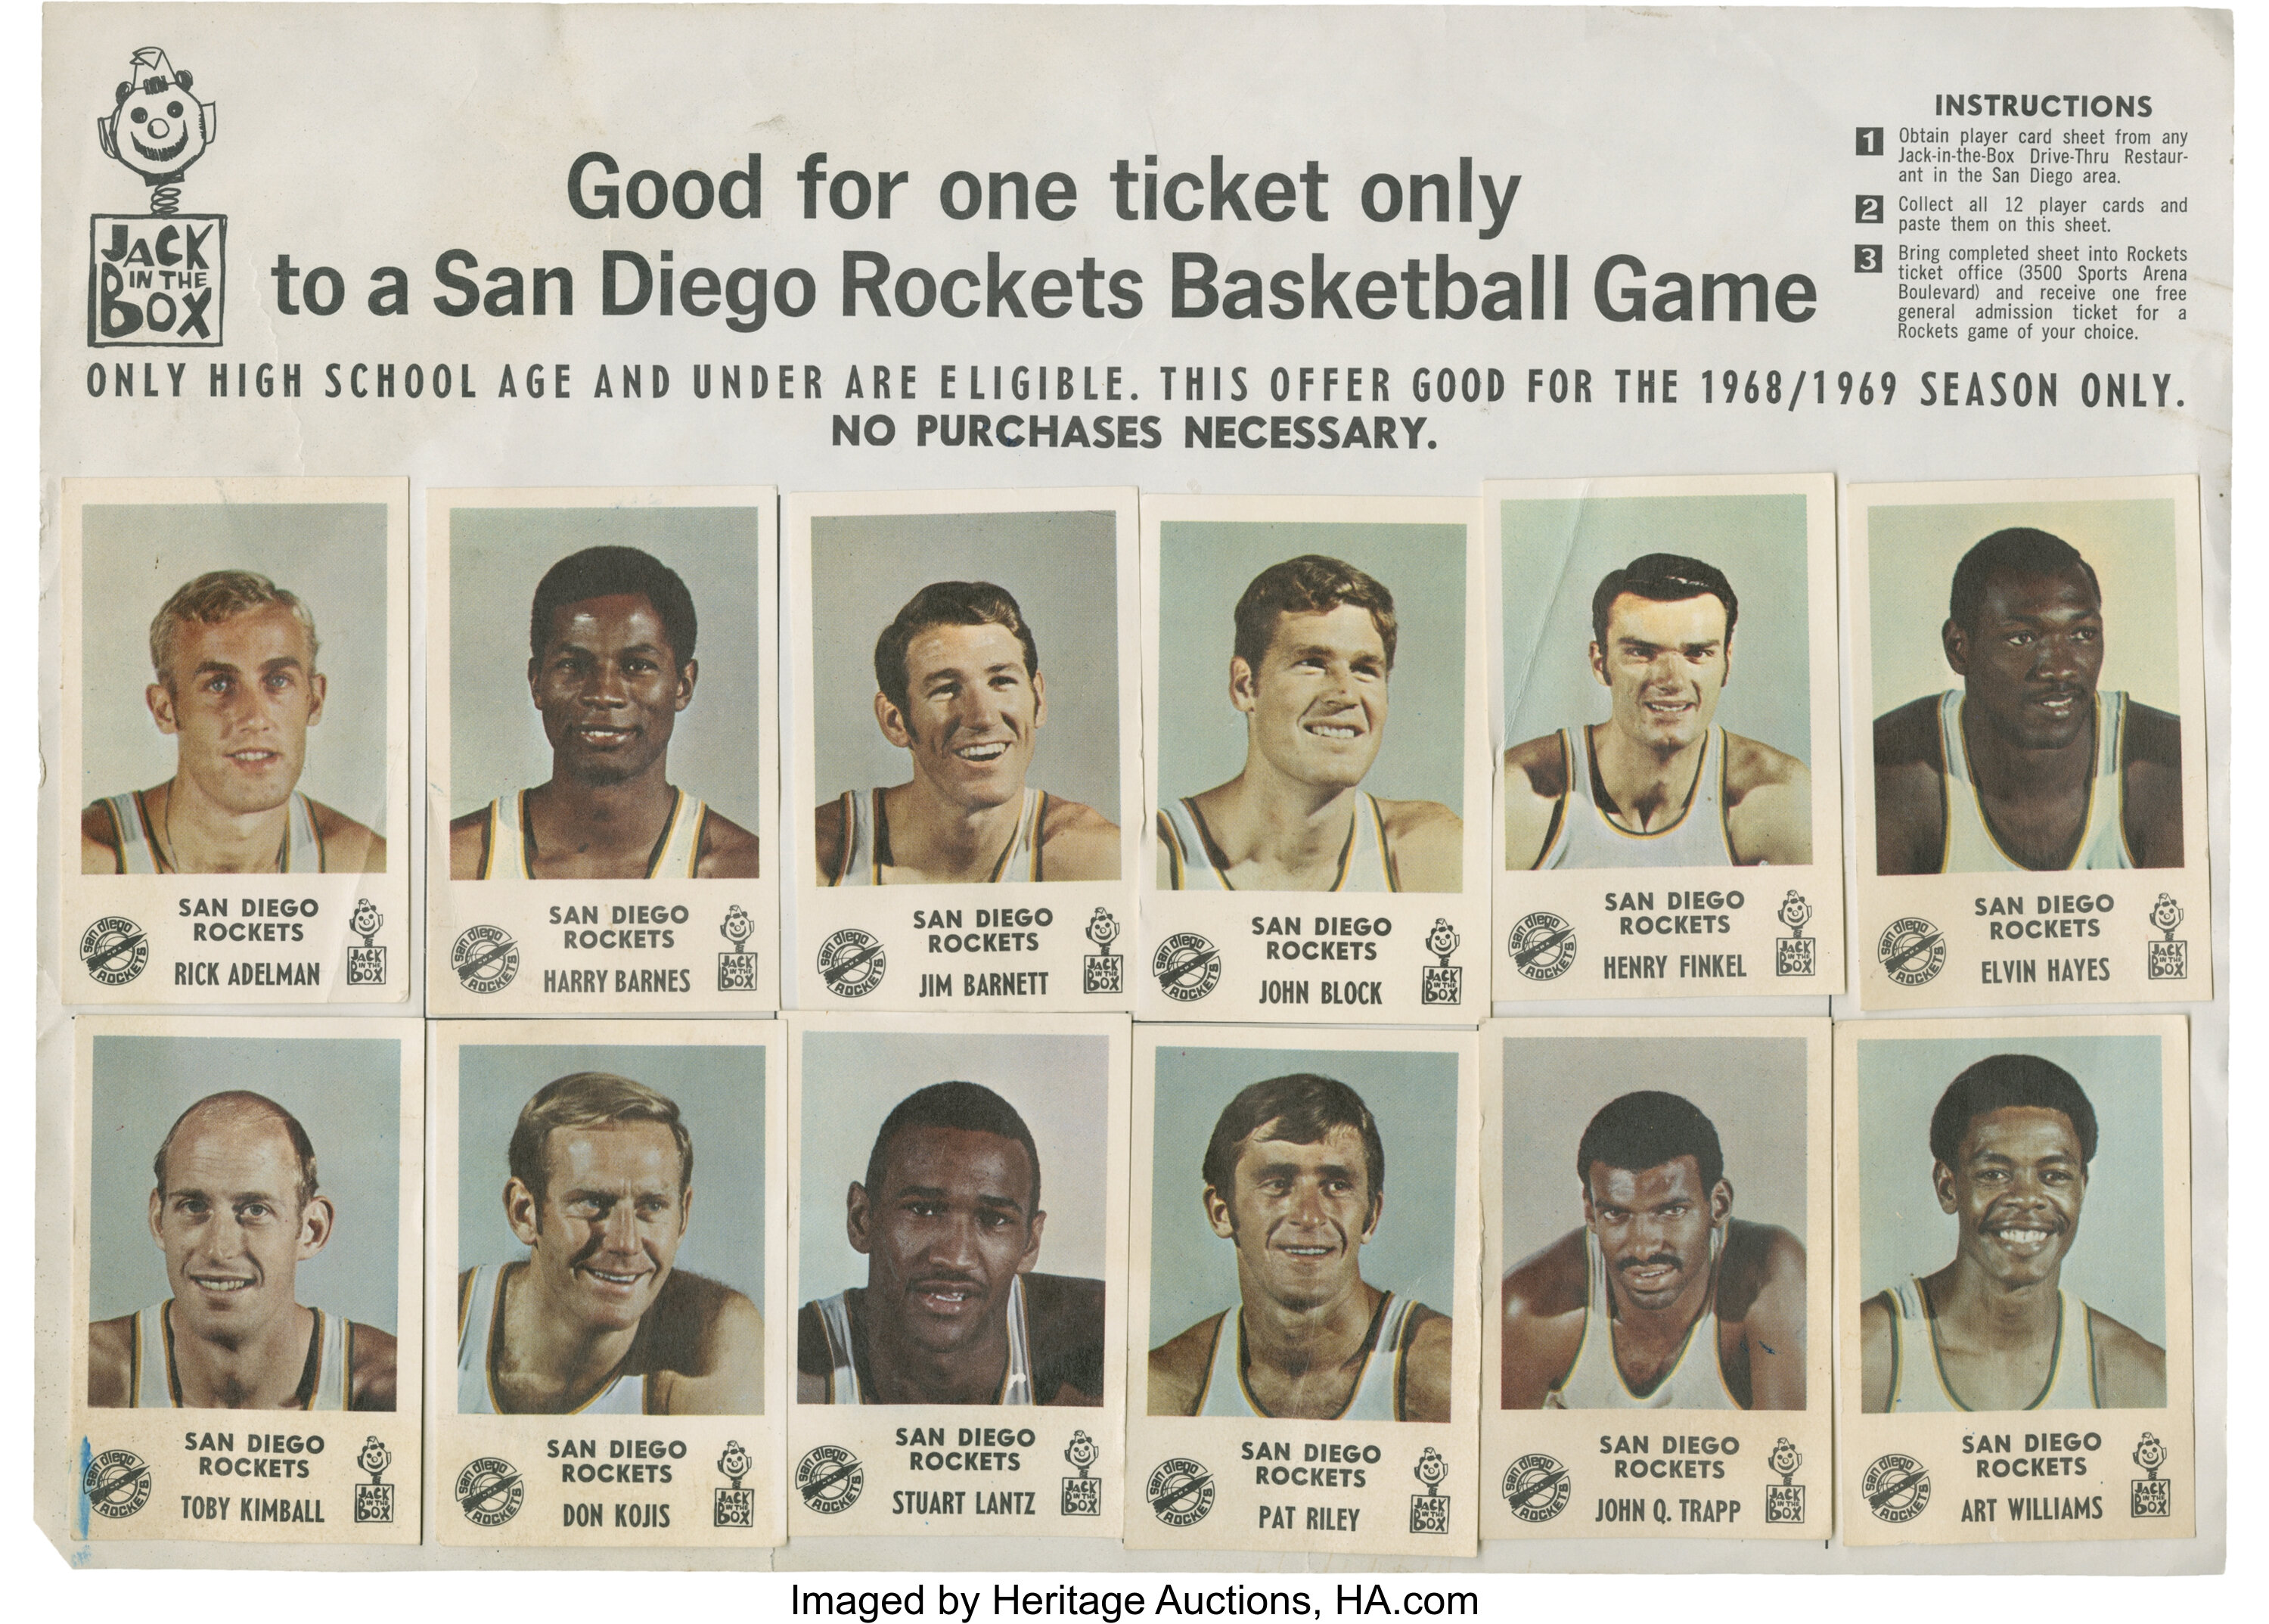 Houston Rockets - On this day in 1968 the San Diego Rockets